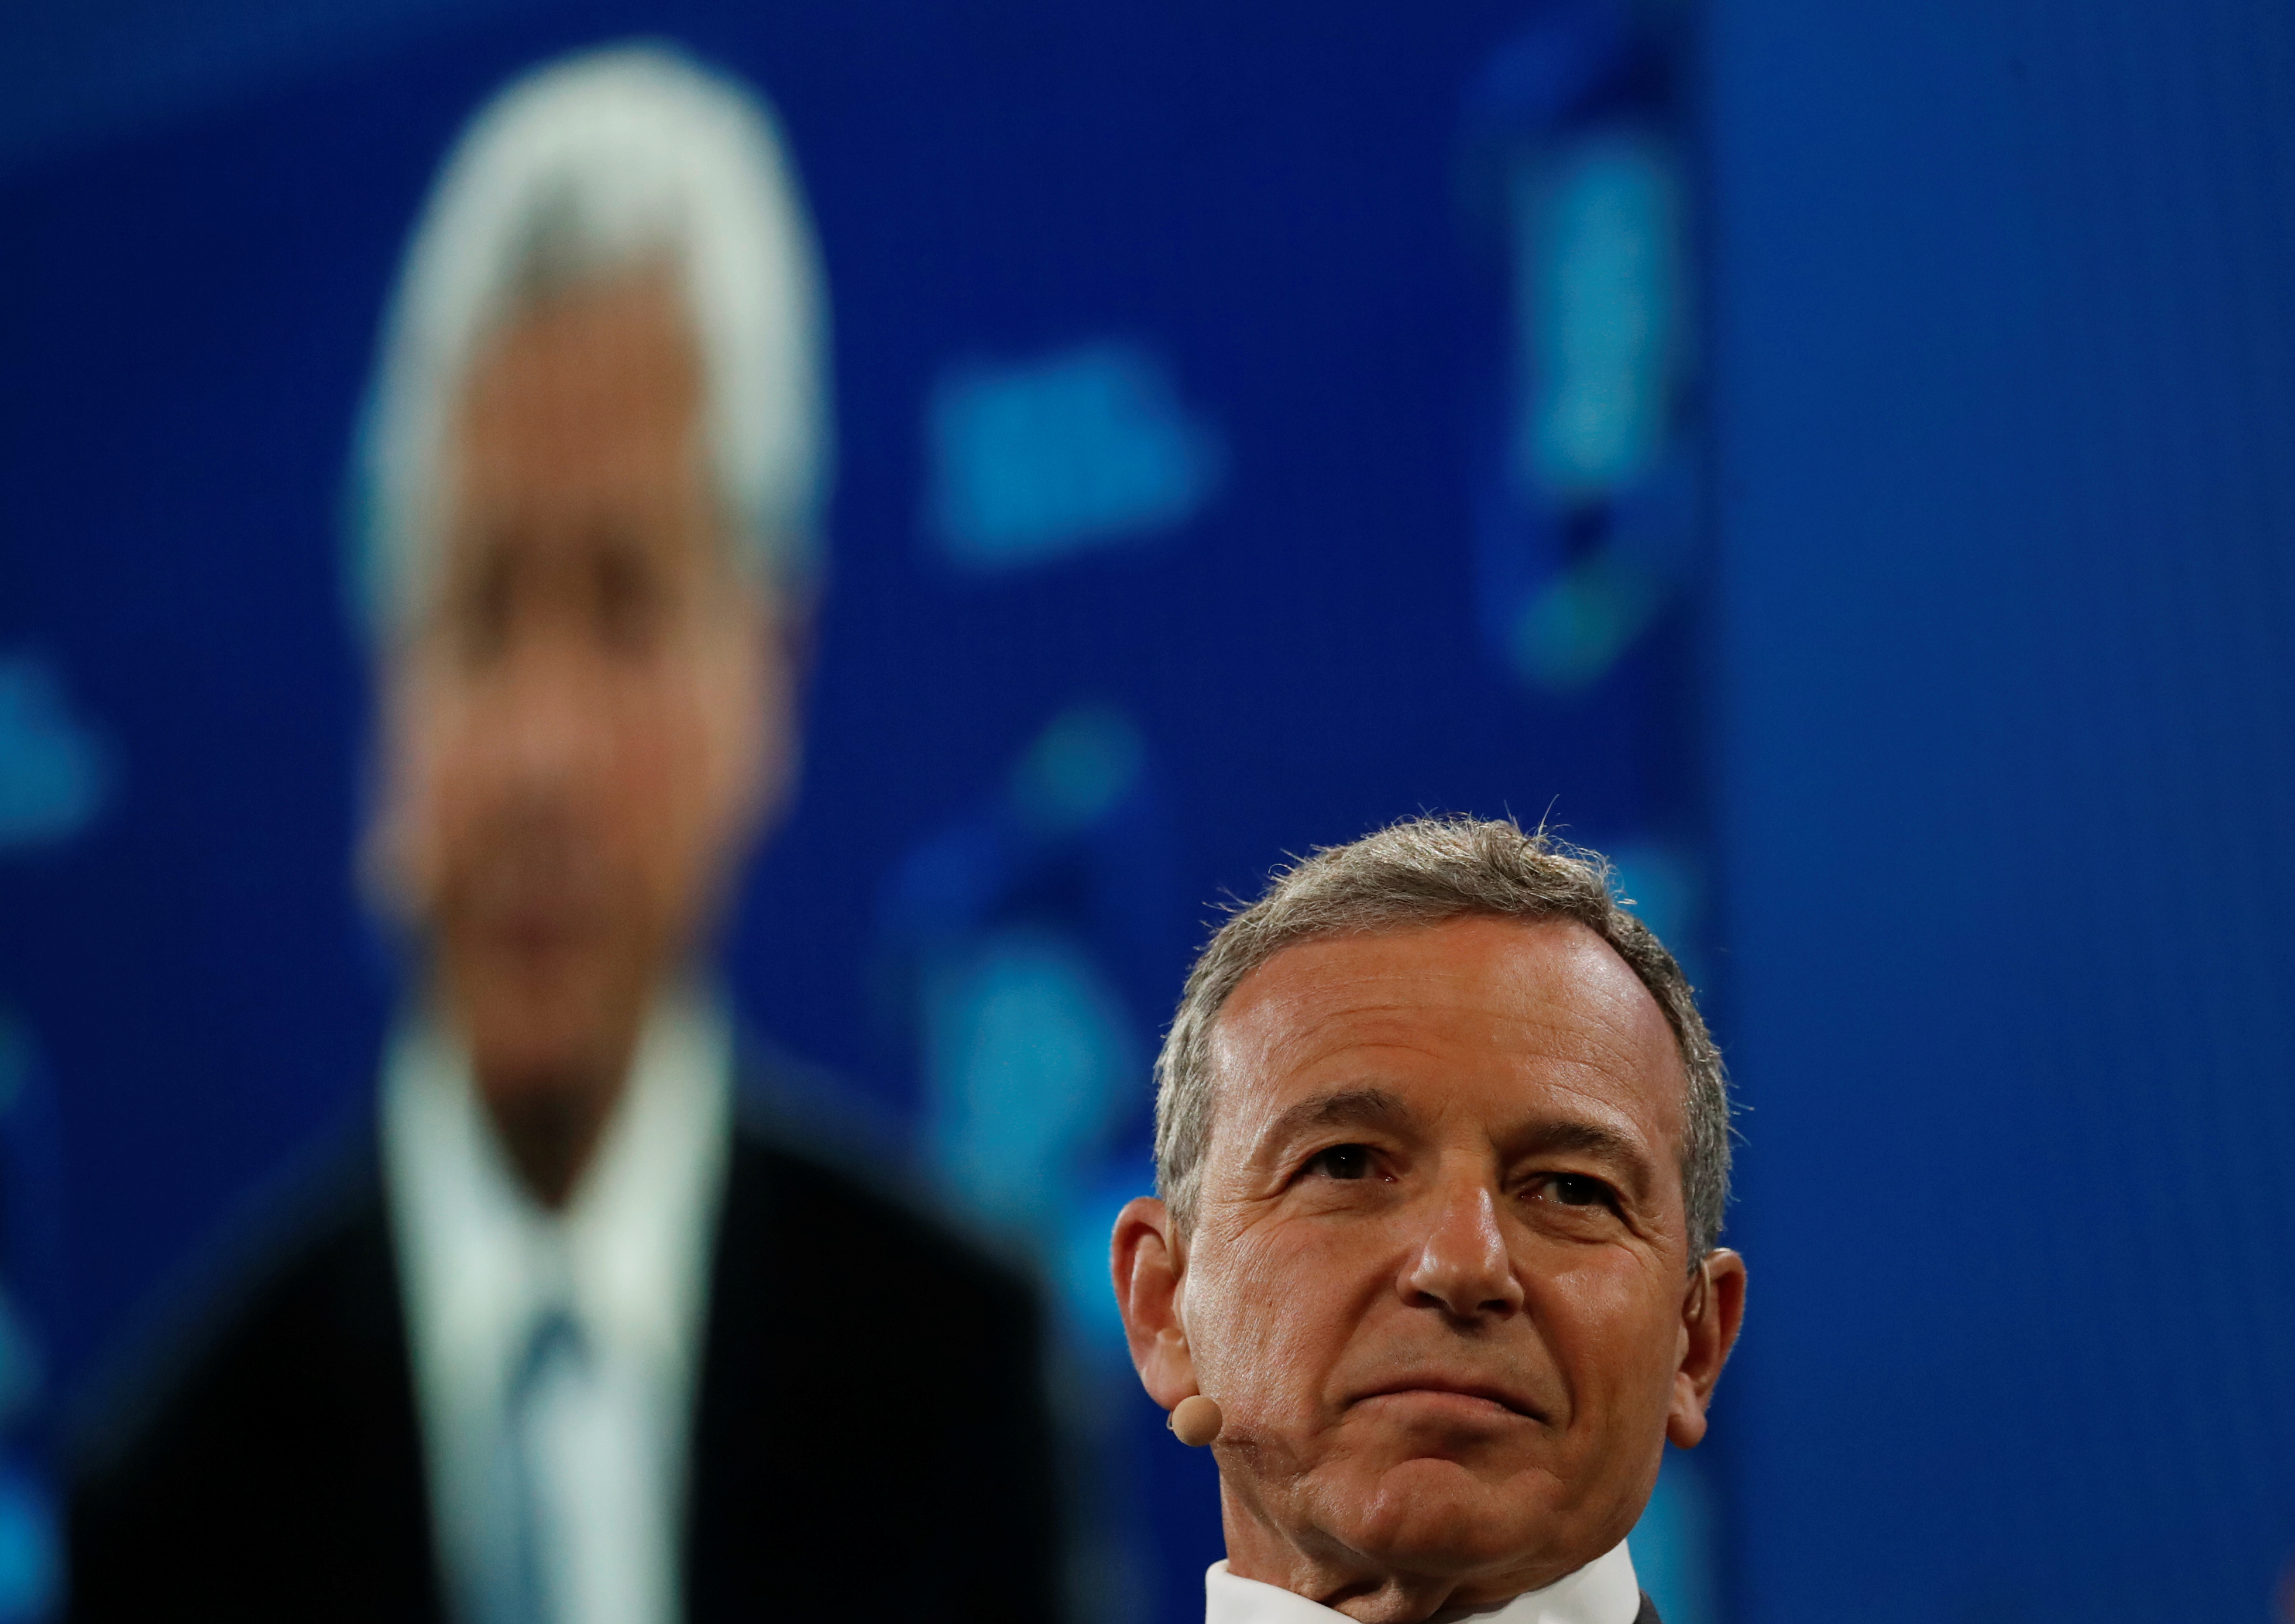 Disney's Chief Executive Officer Bob Iger speaks during the Bloomberg Global Business Forum in New York City